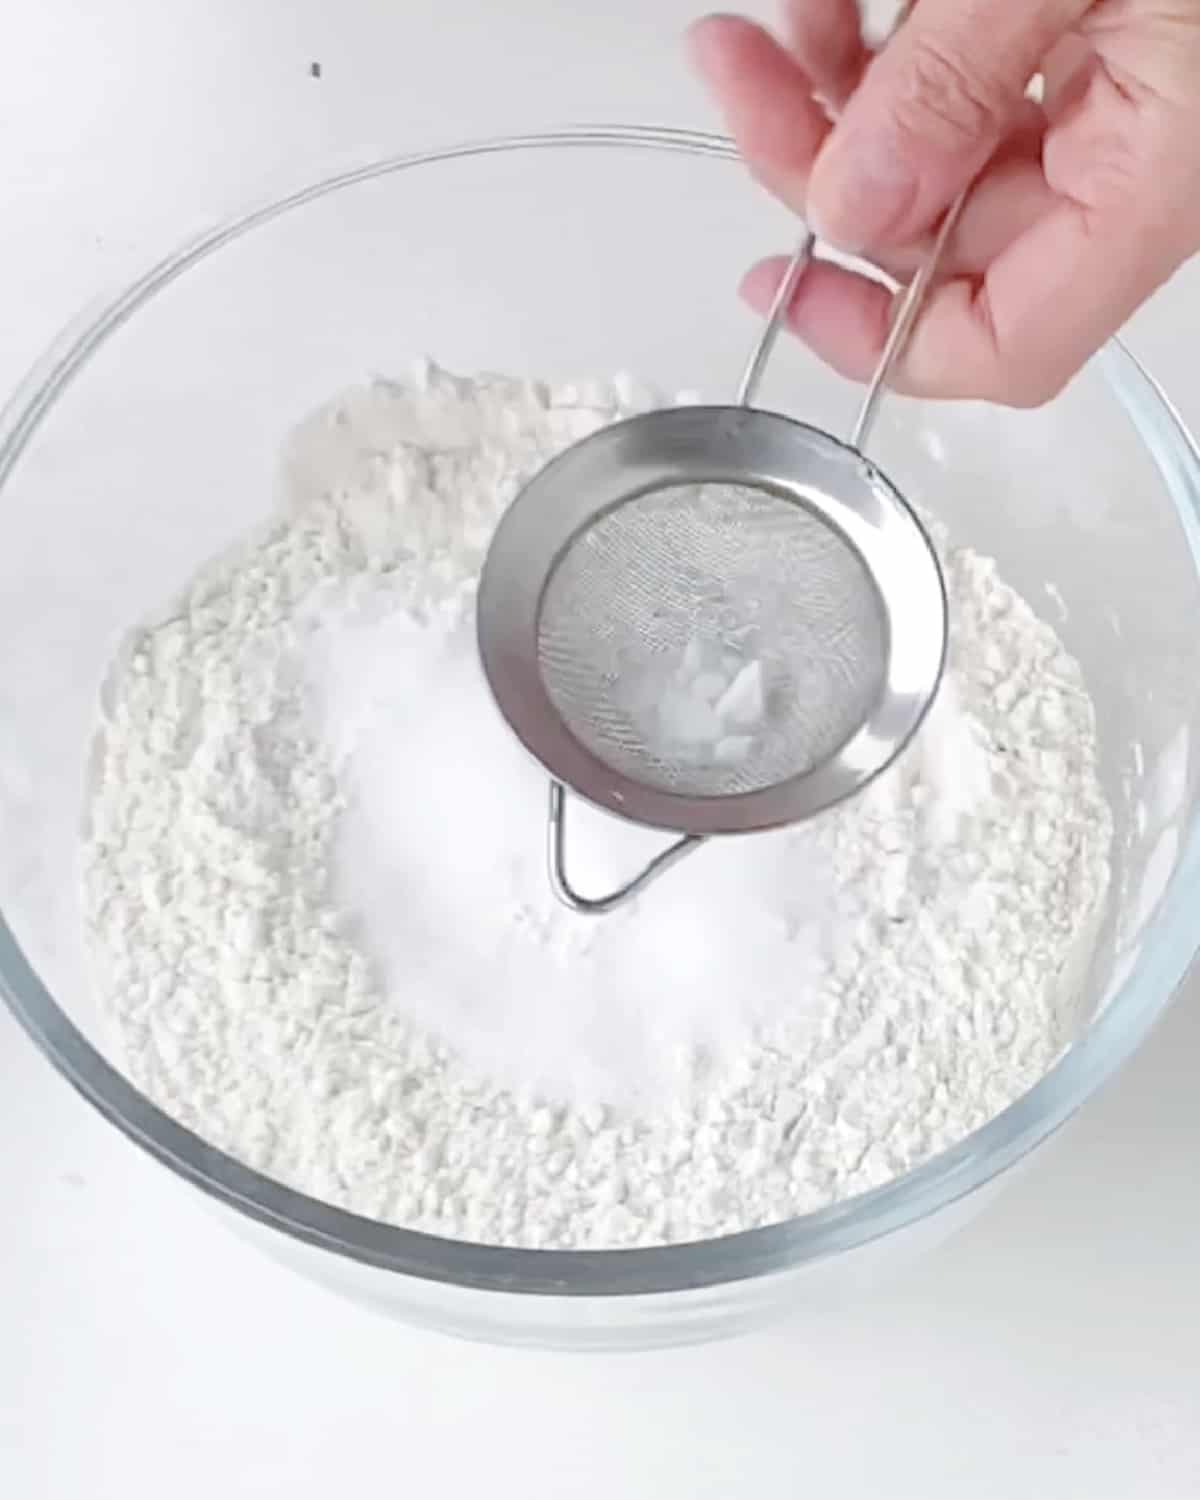 Sifting baking soda over flour mixture in a glass bowl. White surface.